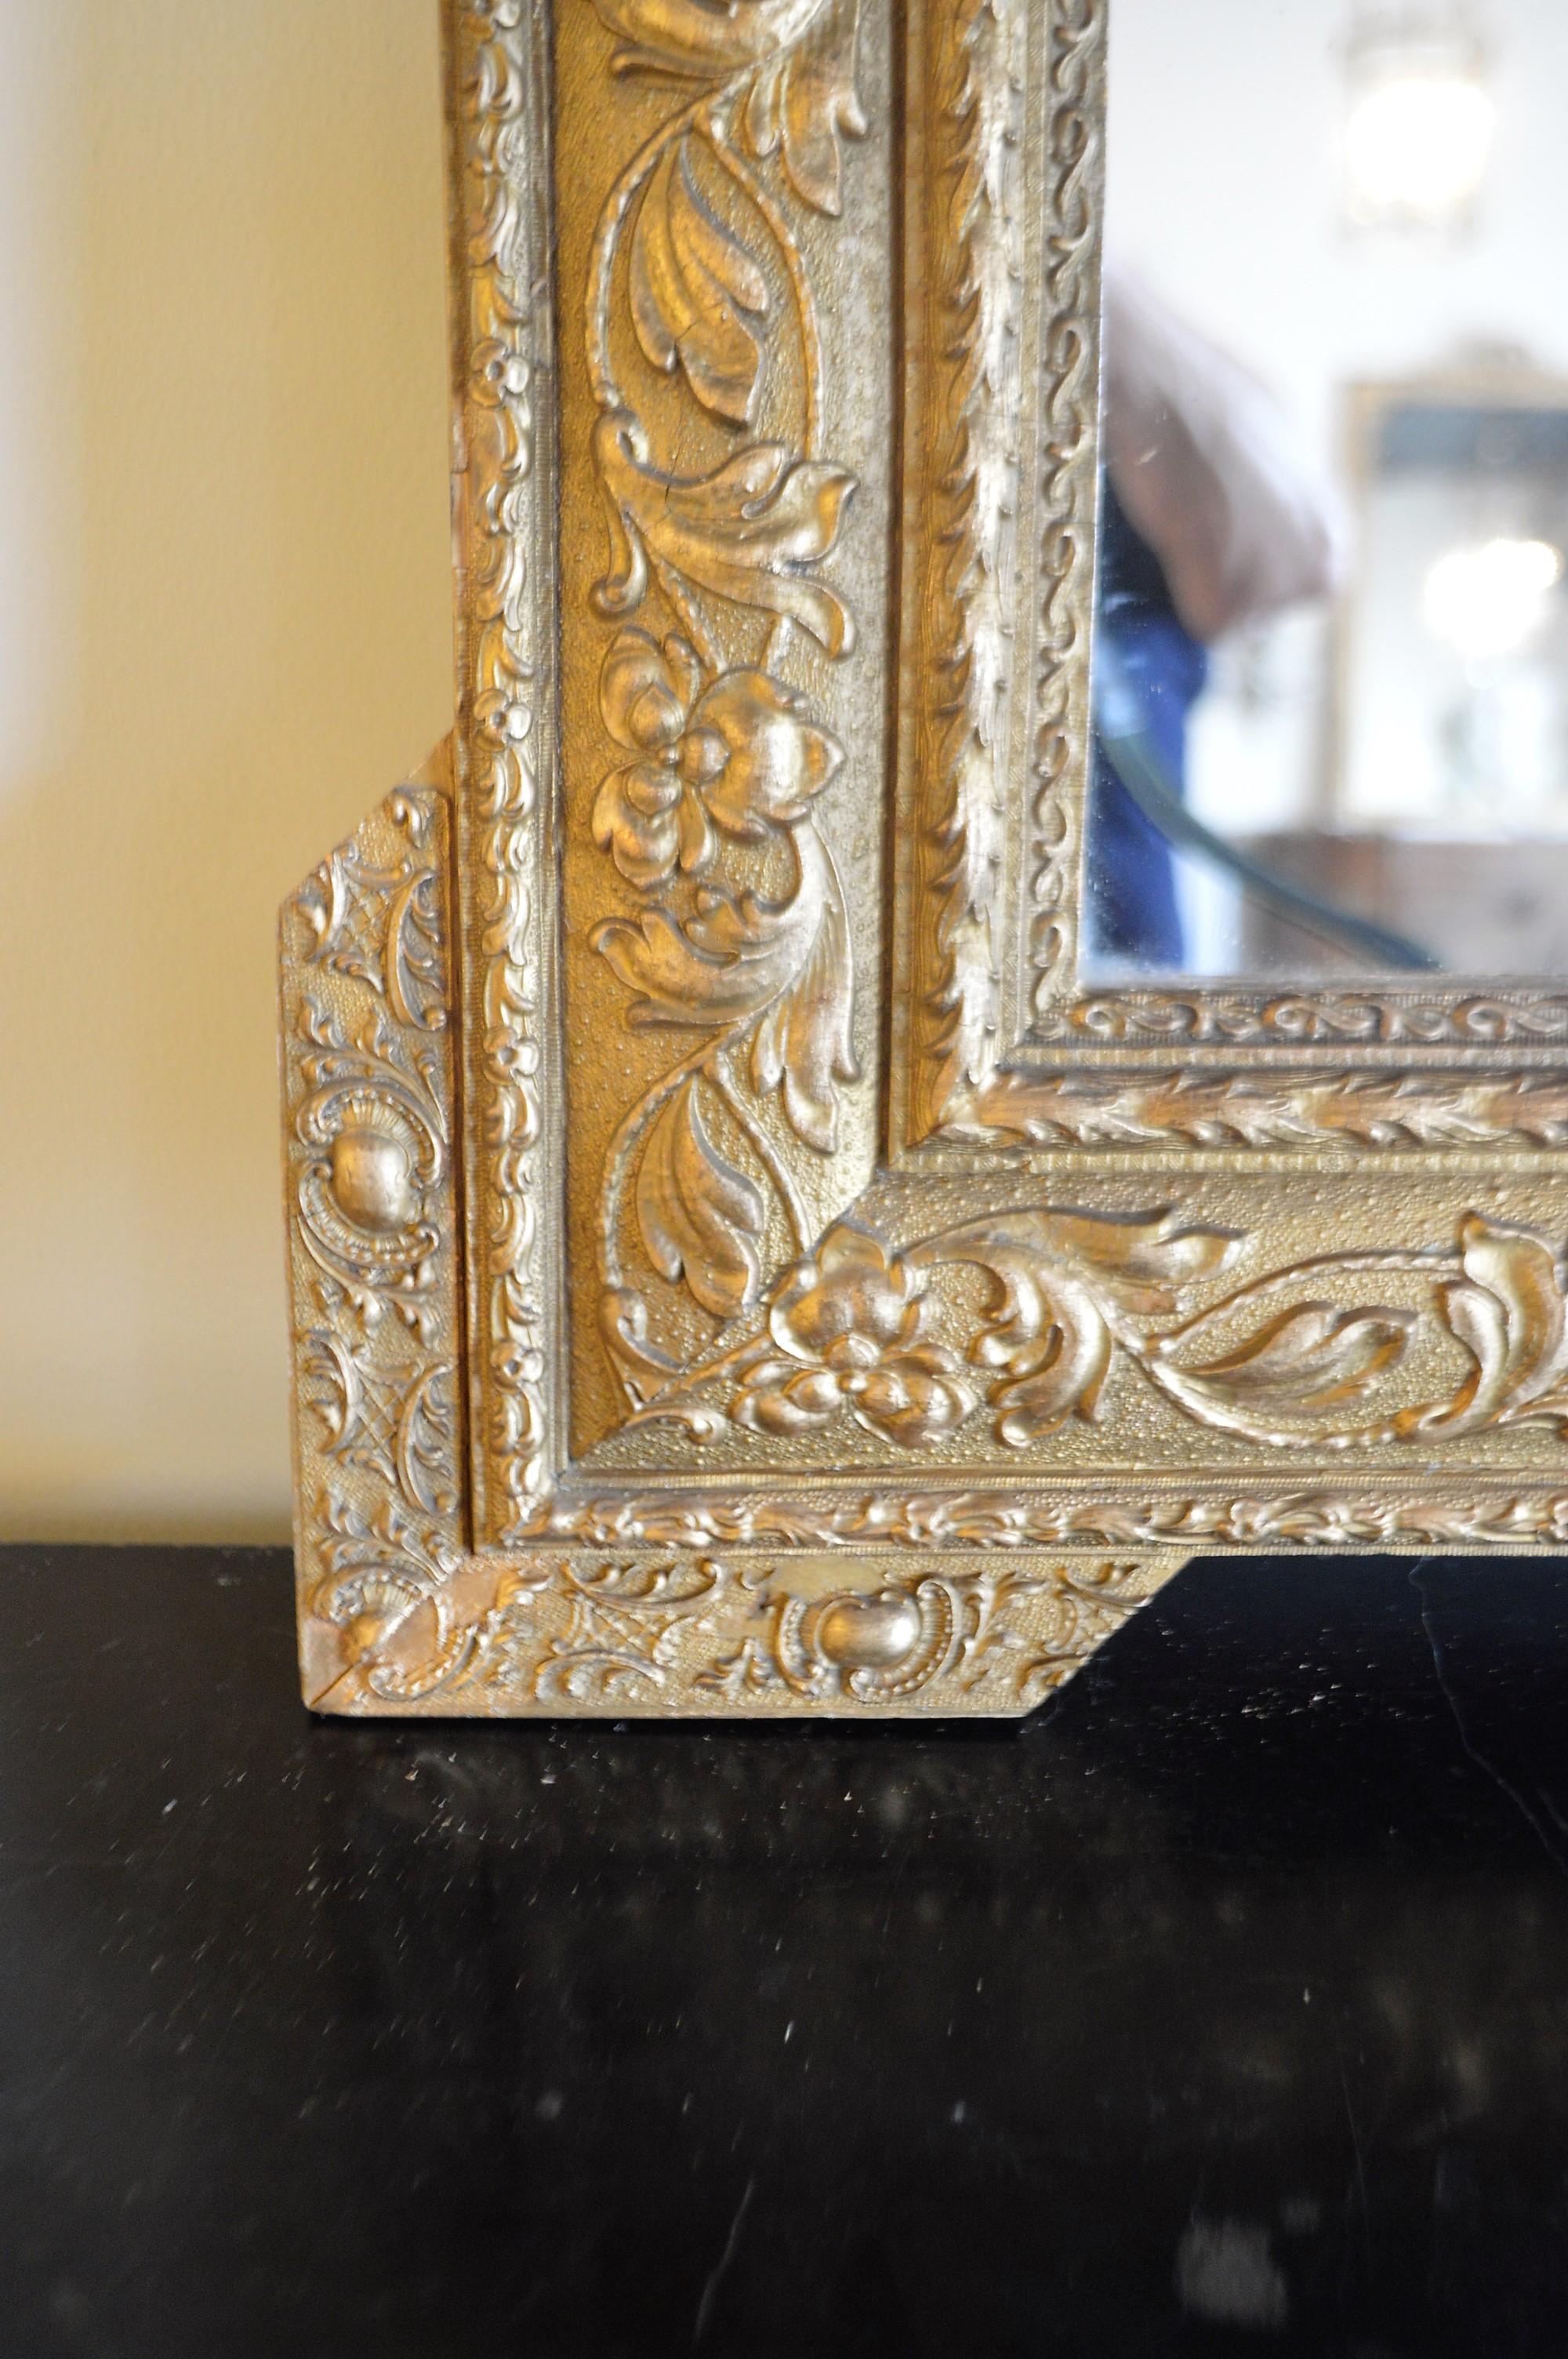 Louis XVI Style Wood Gilded Mirror with Wreath Decorative Top and Carved Frame 3